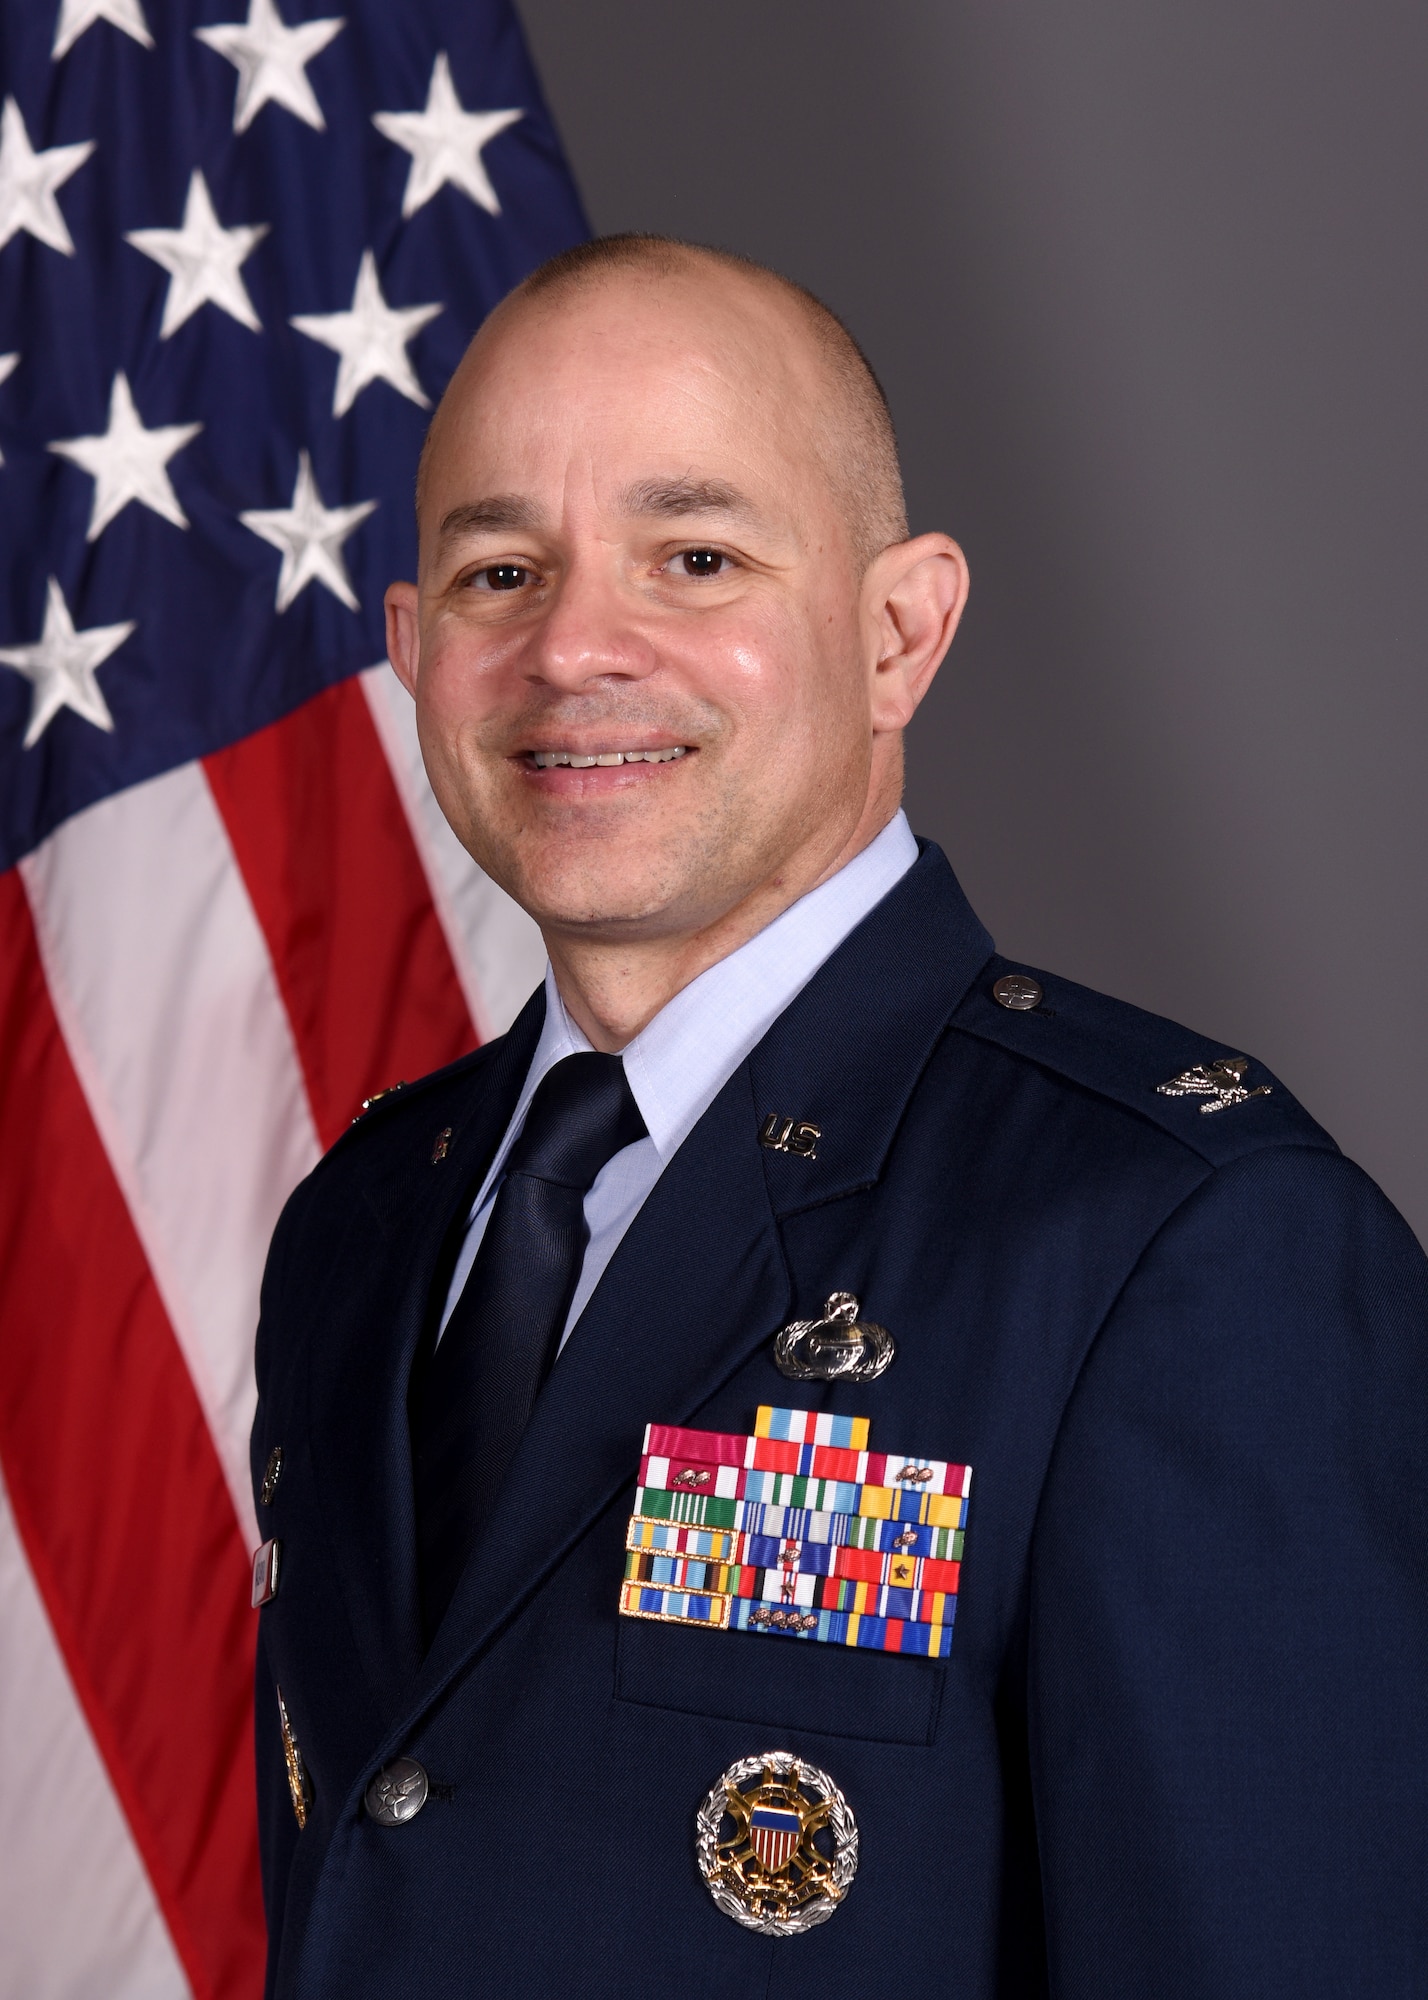 Official photo of Colonel Andres R. Nazario, 17th Training Wing Commander